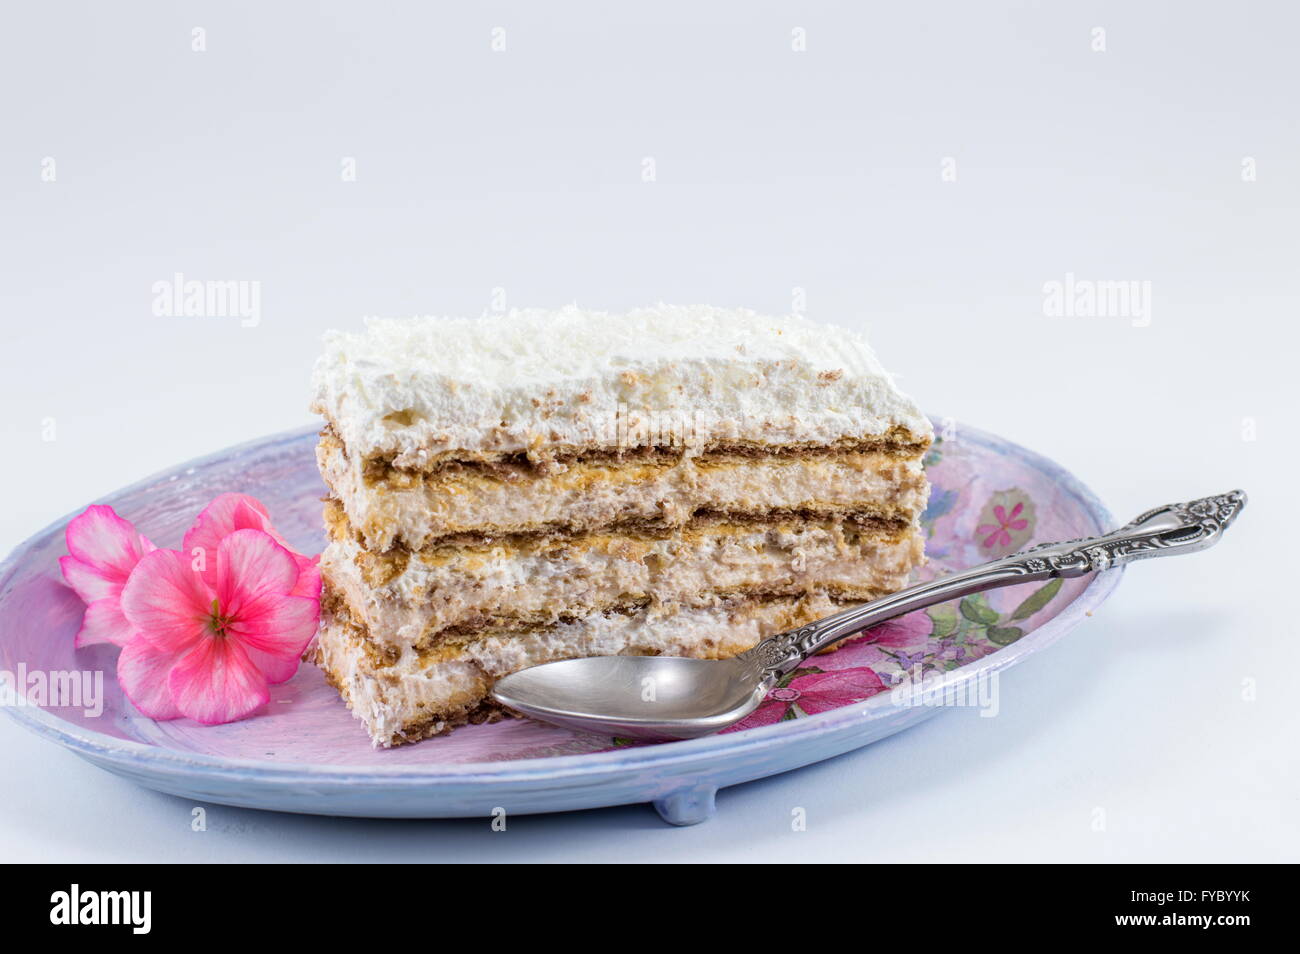 Slice of homemade cake made out of piled biscuits on a plate Stock Photo